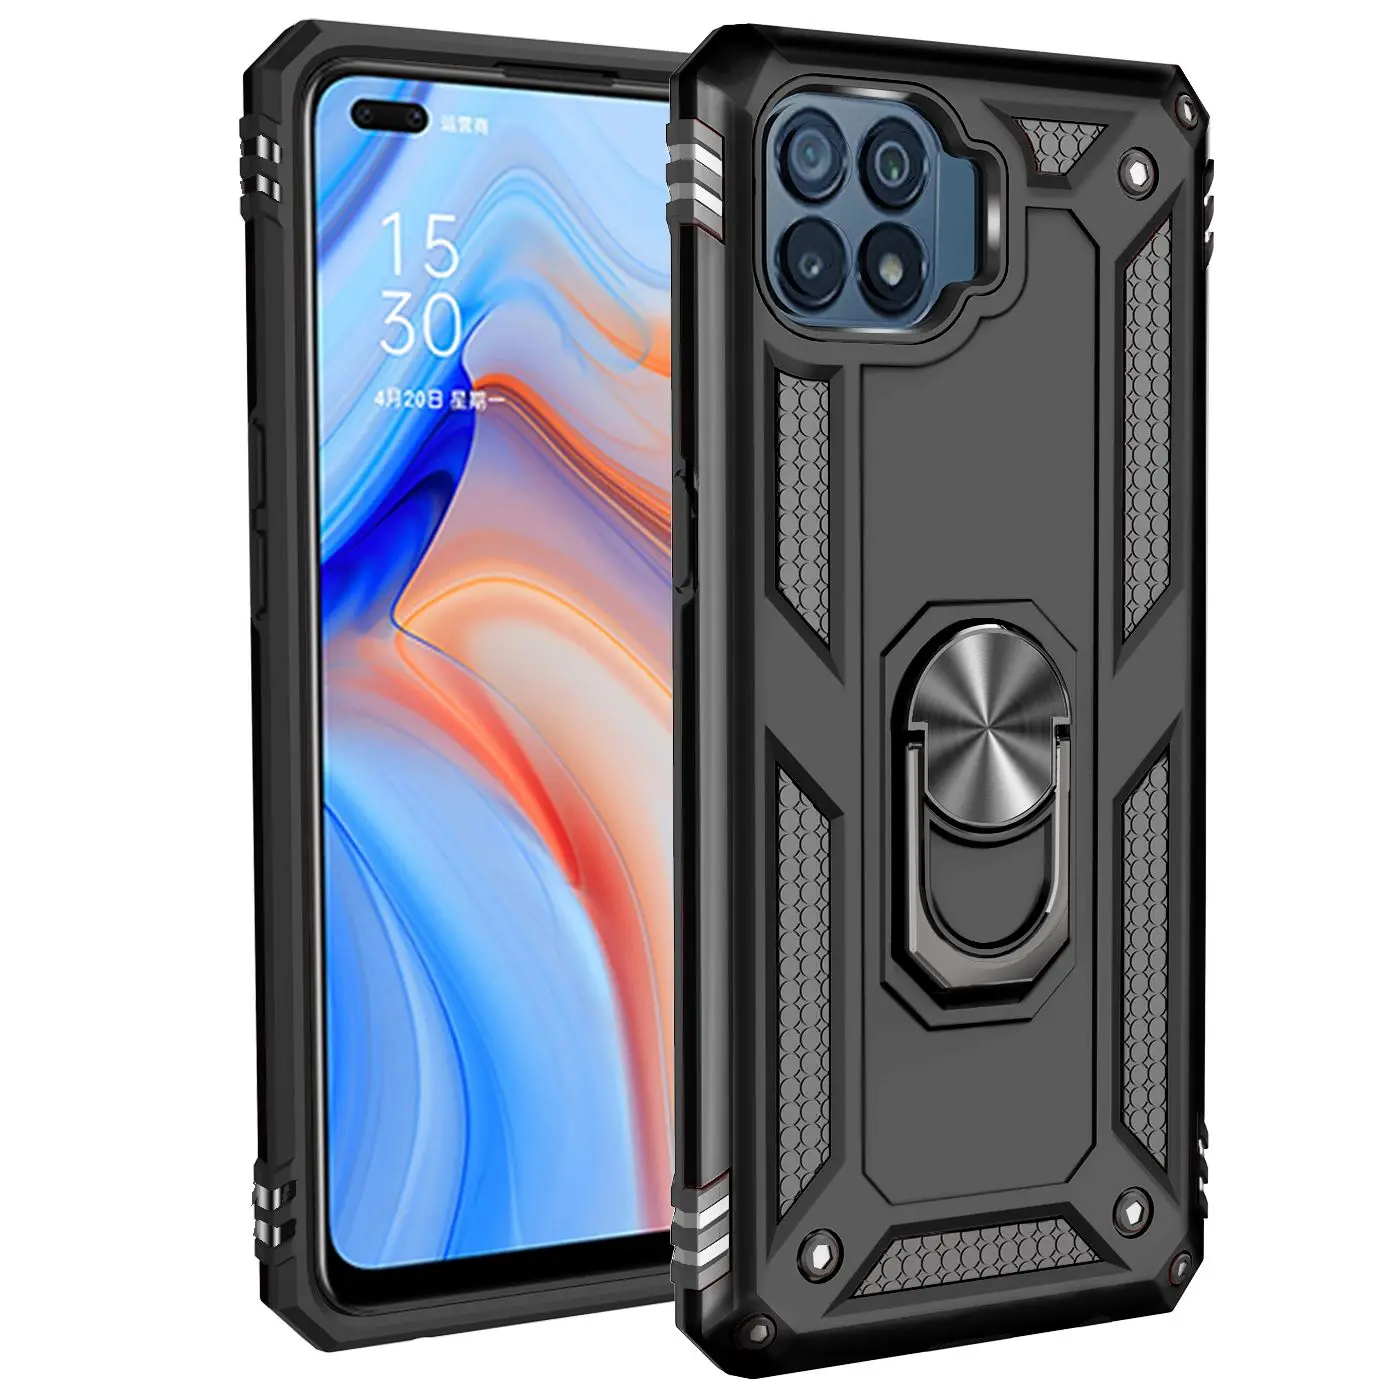 

Phone Case For OPPO Realme Reno AX5S A5S A7 A12 A5 4 4F F19 F17 AX7 A11K A3S A12E C1 5F 5 F11 Pro Lite Armor Shockproof Cover